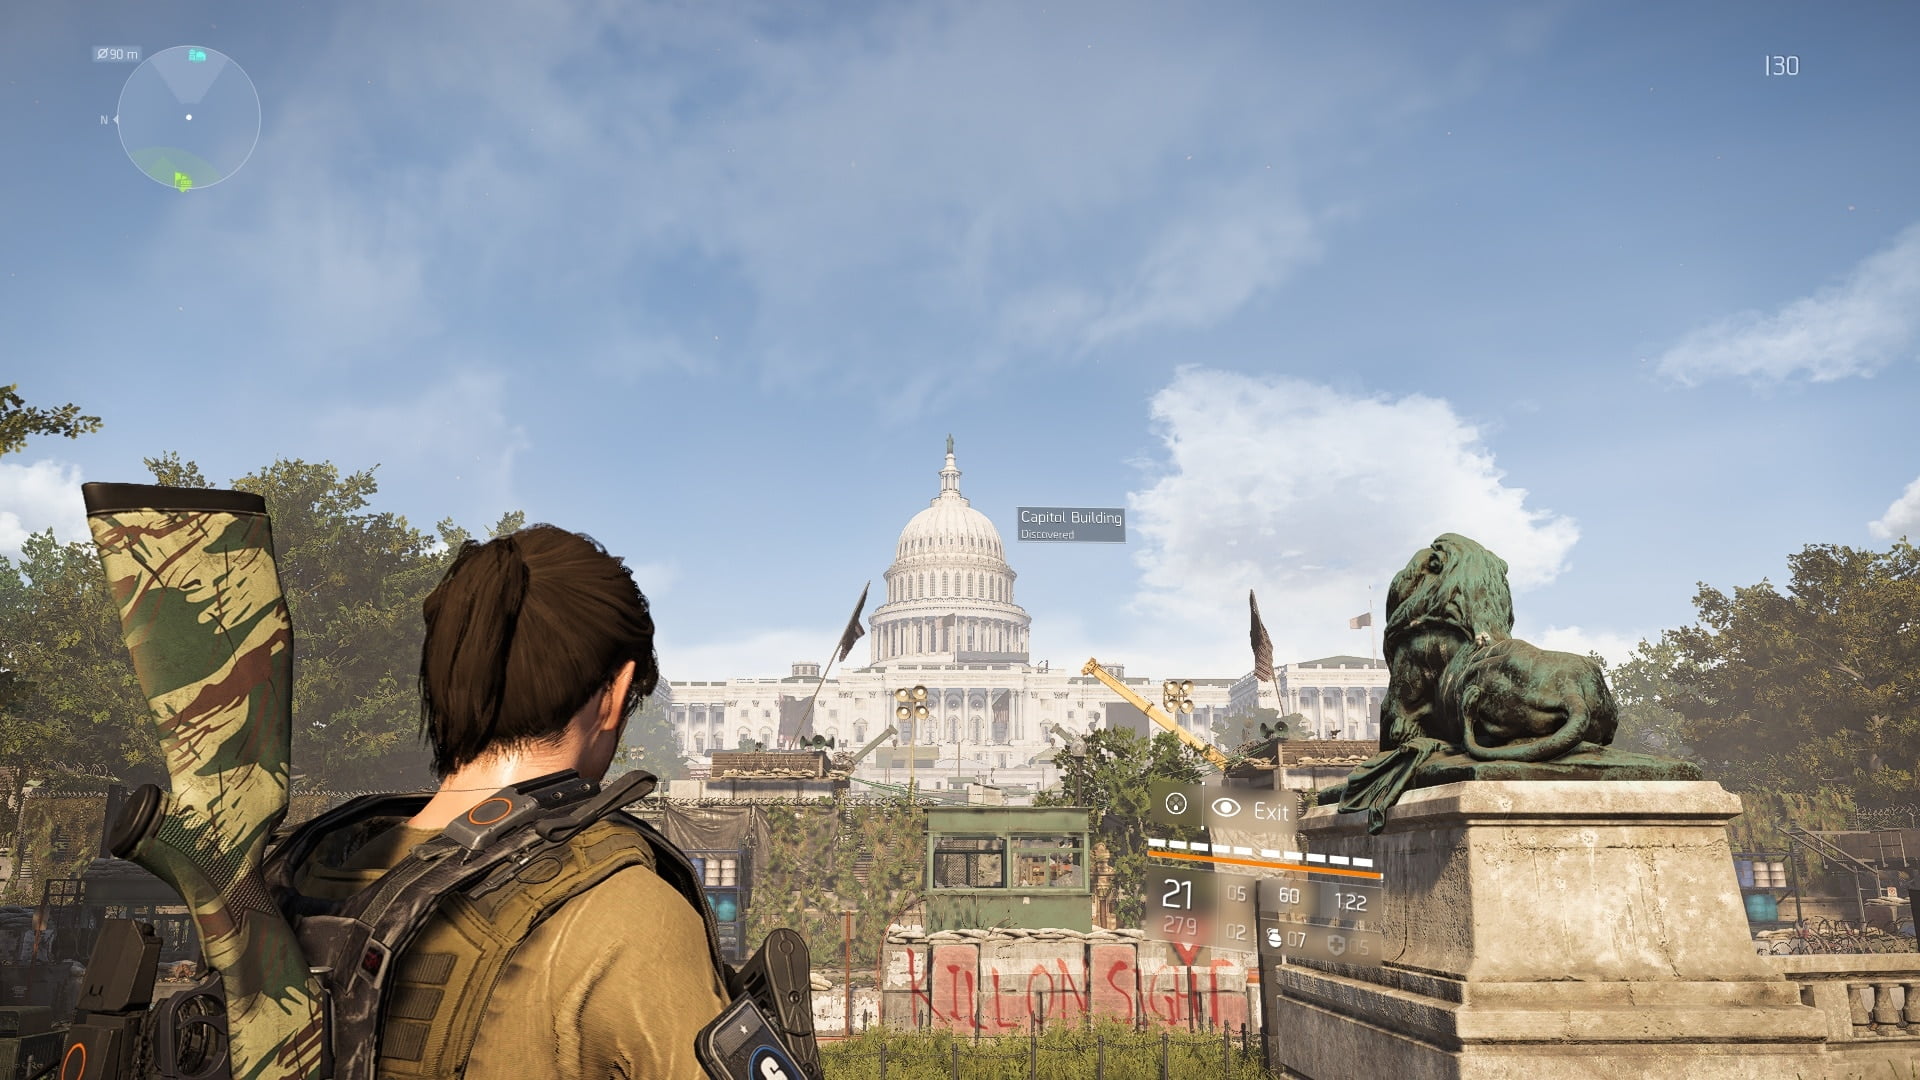 TheDivision2 5 1 2019 10 17 02 PM 412